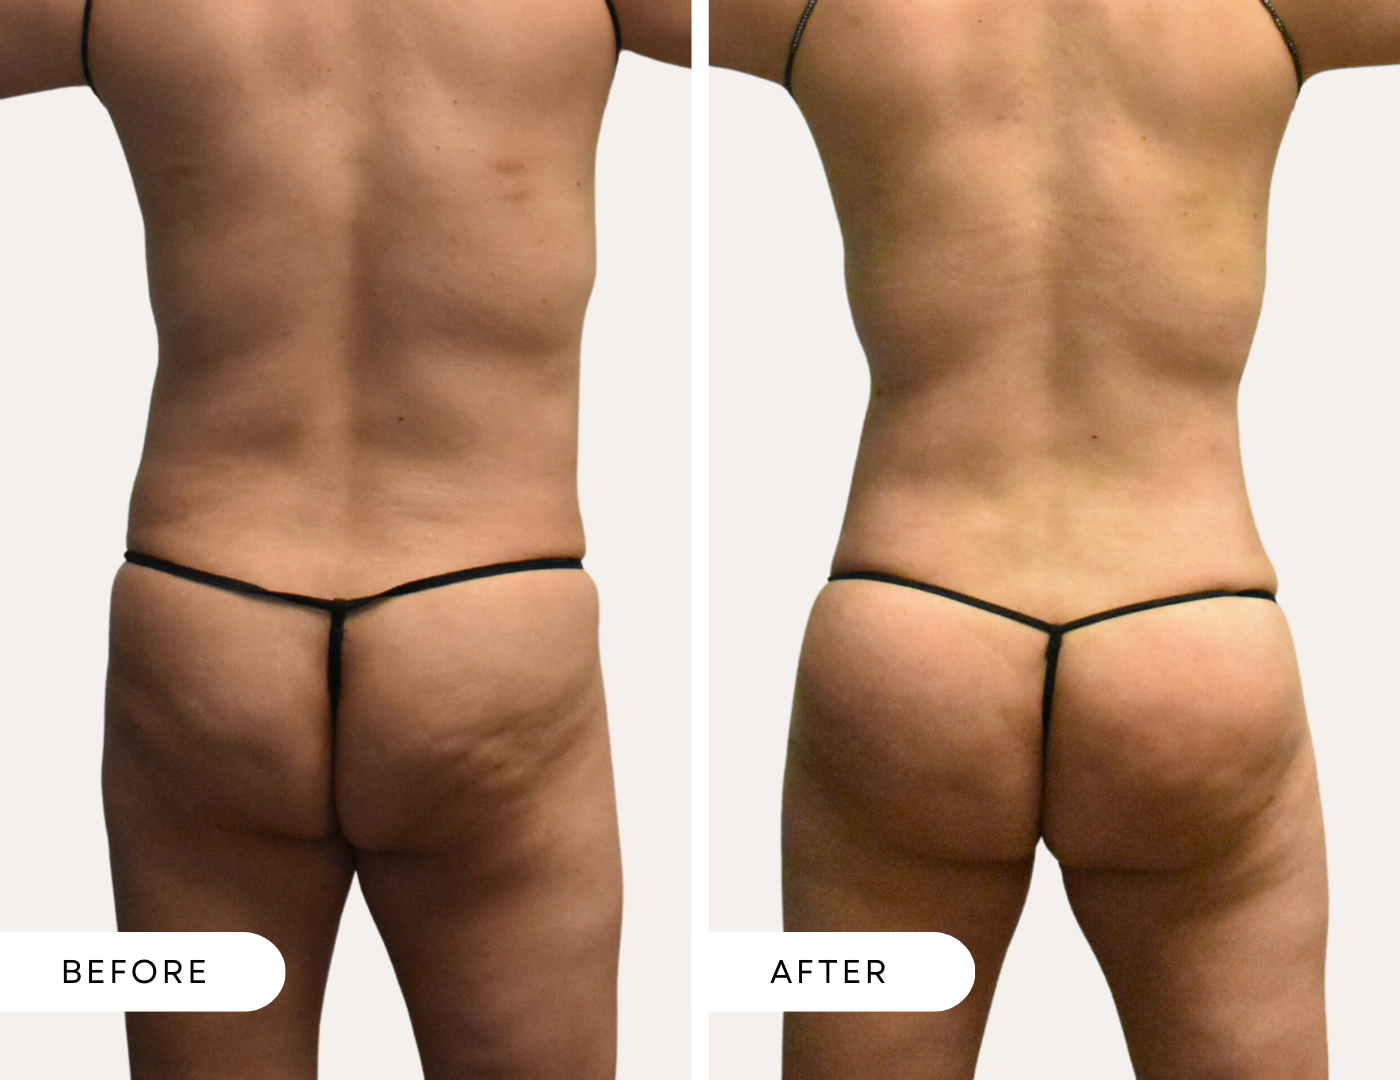 Female before and after photo. Fat Transfer results. Buttocks and Back.